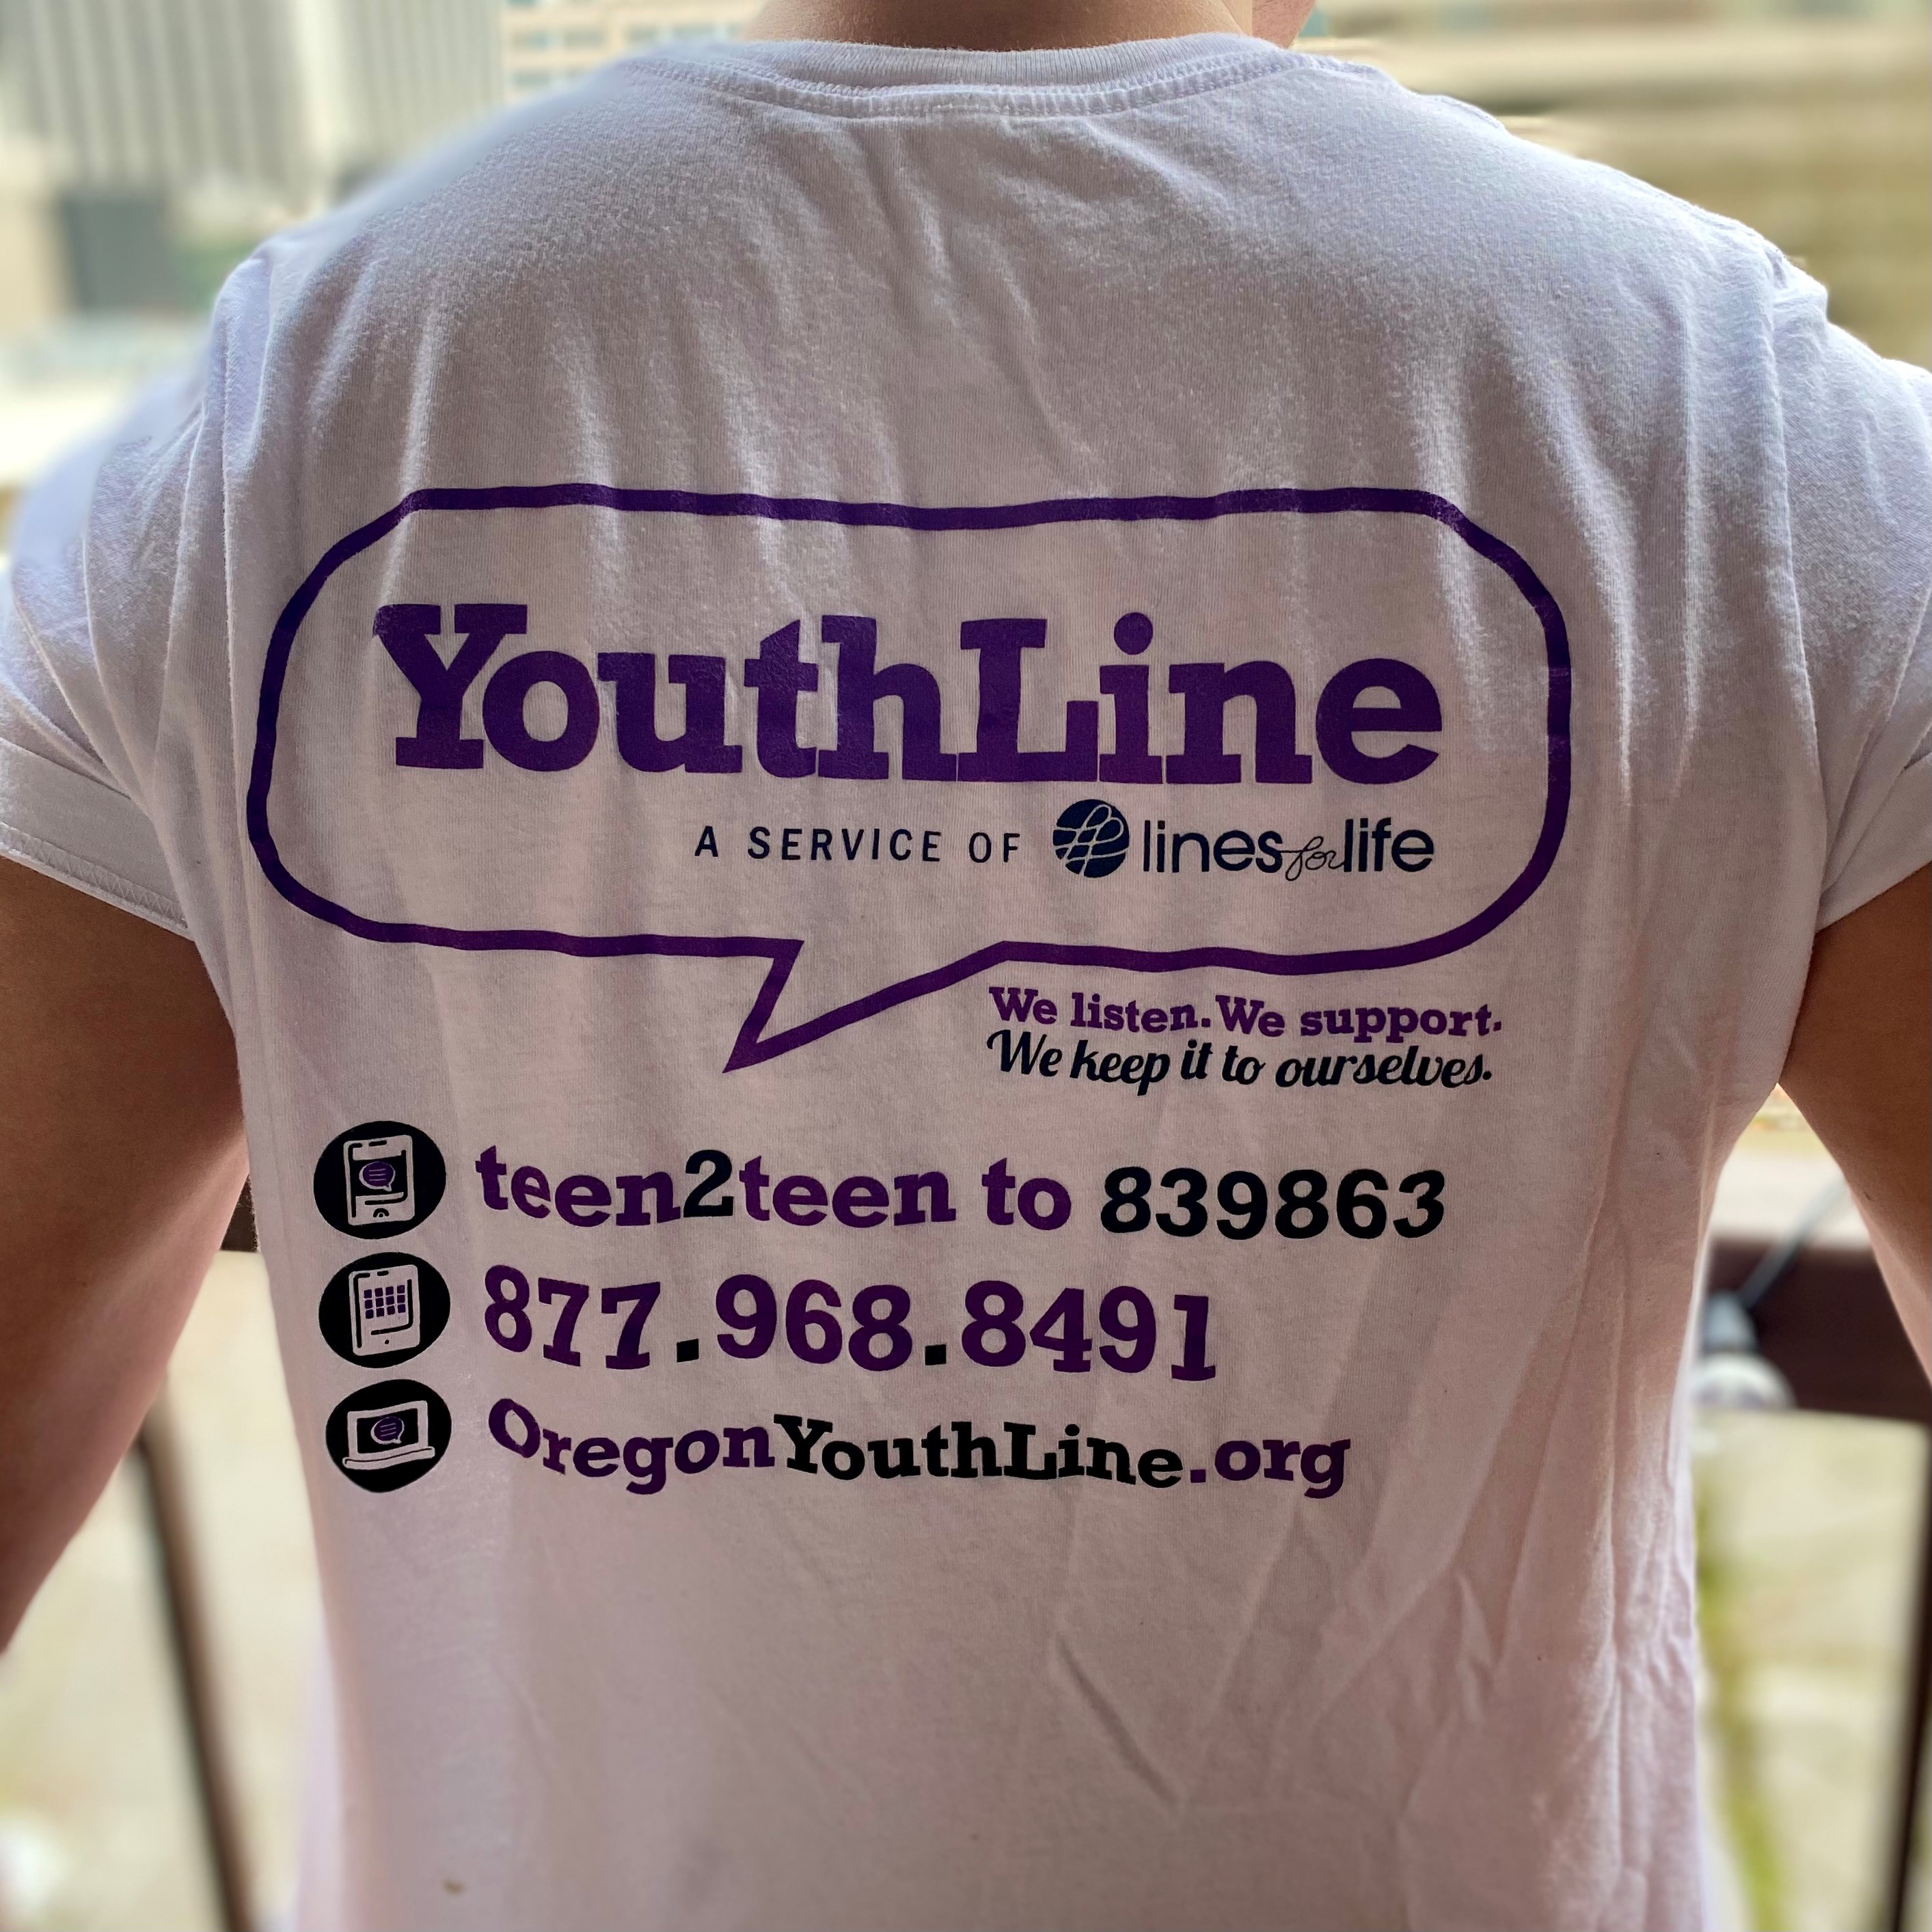 Back of t-shirt with text about YouthLine